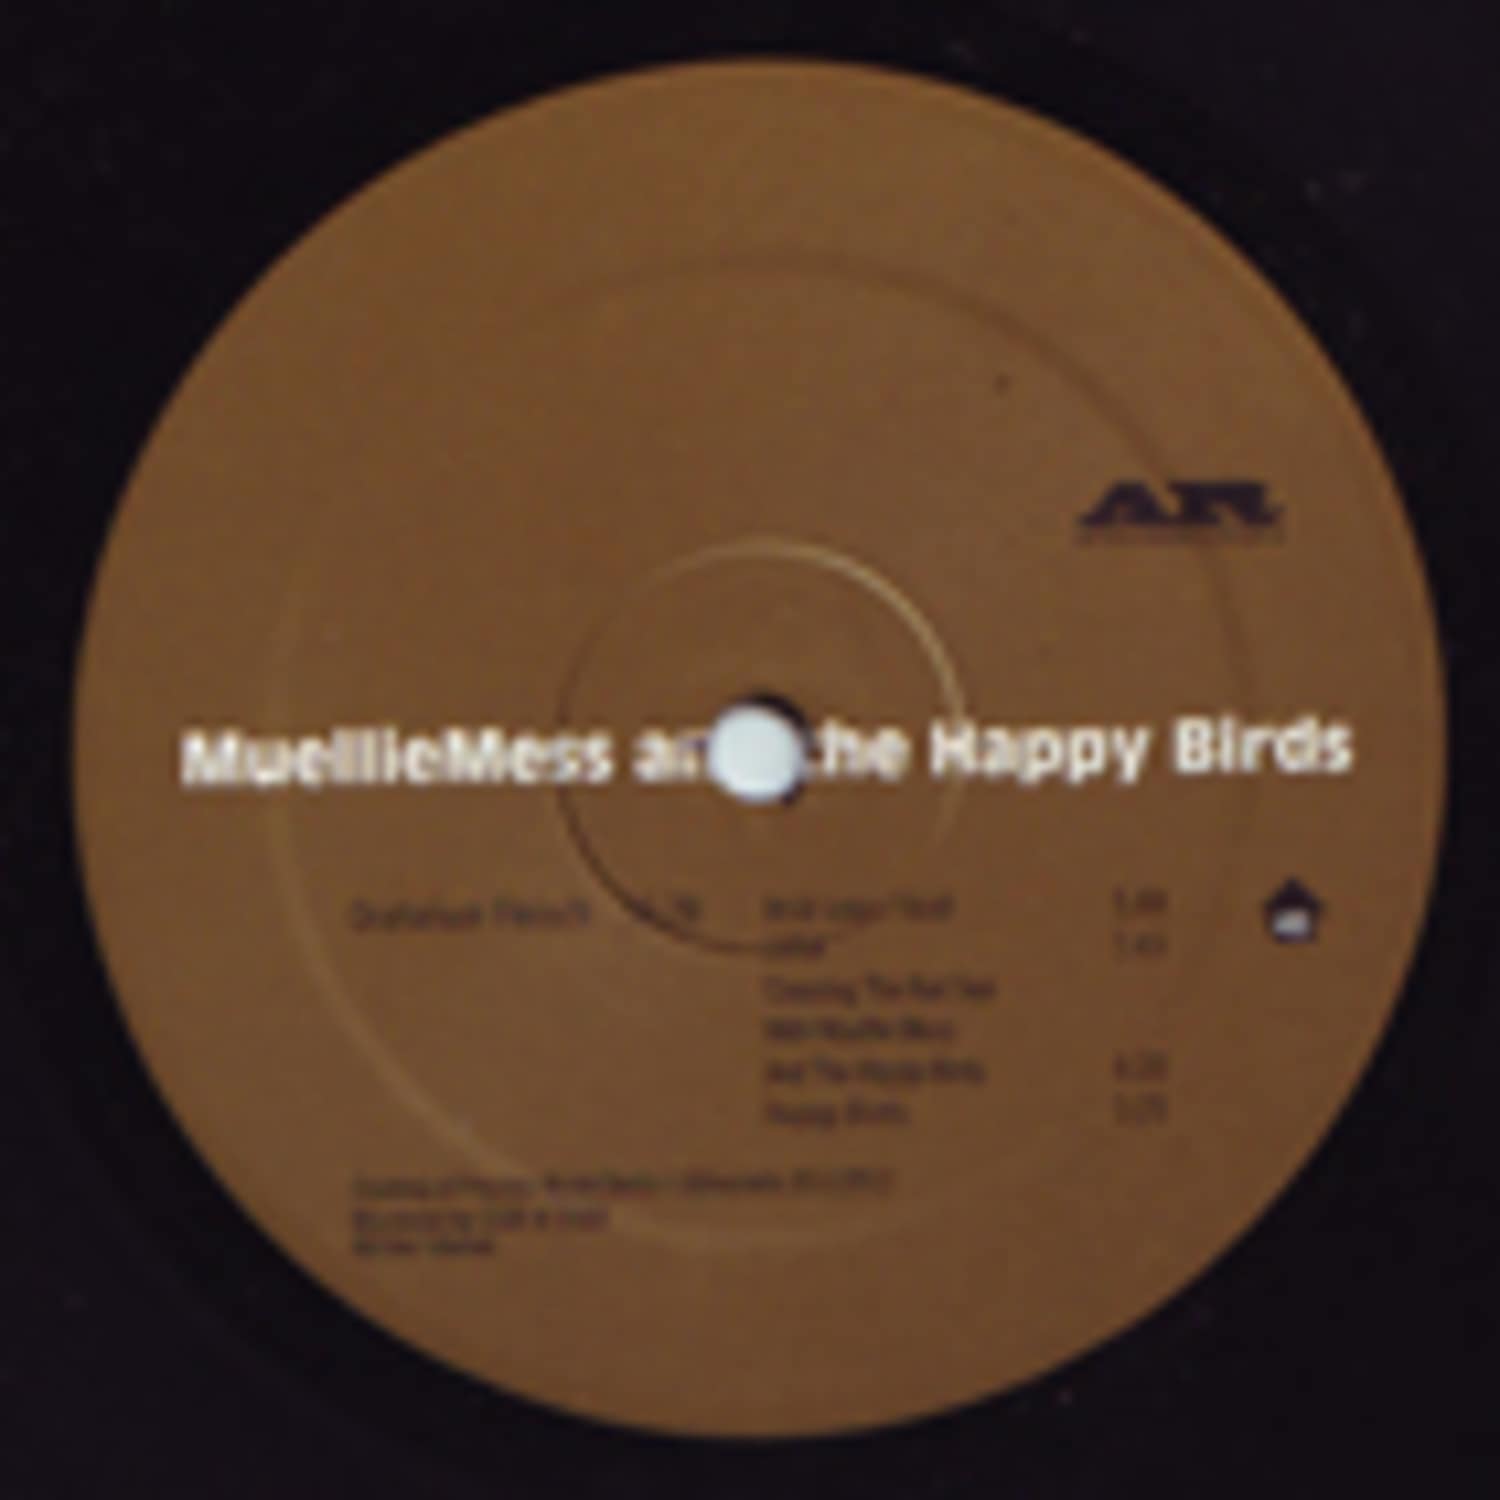 Mullie Mess And The Happy Birds - WIRR 1